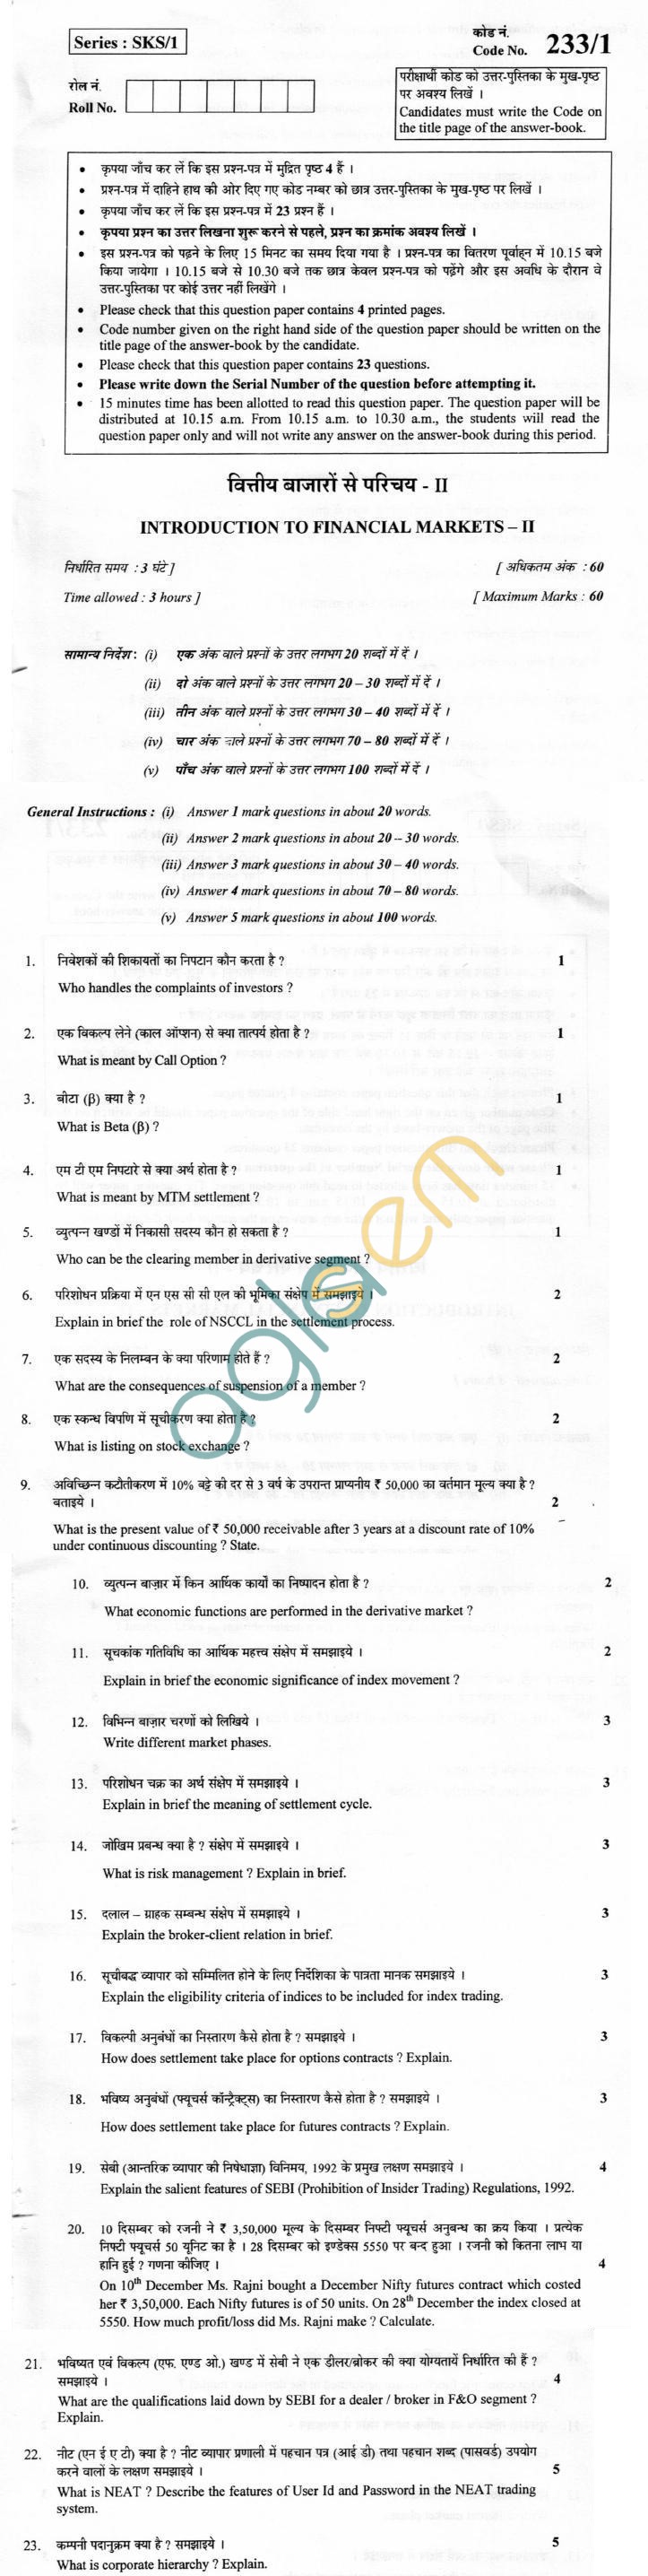 CBSE Board Exam 2013 Class XII Question Paper - Introduction to Financial Markets II